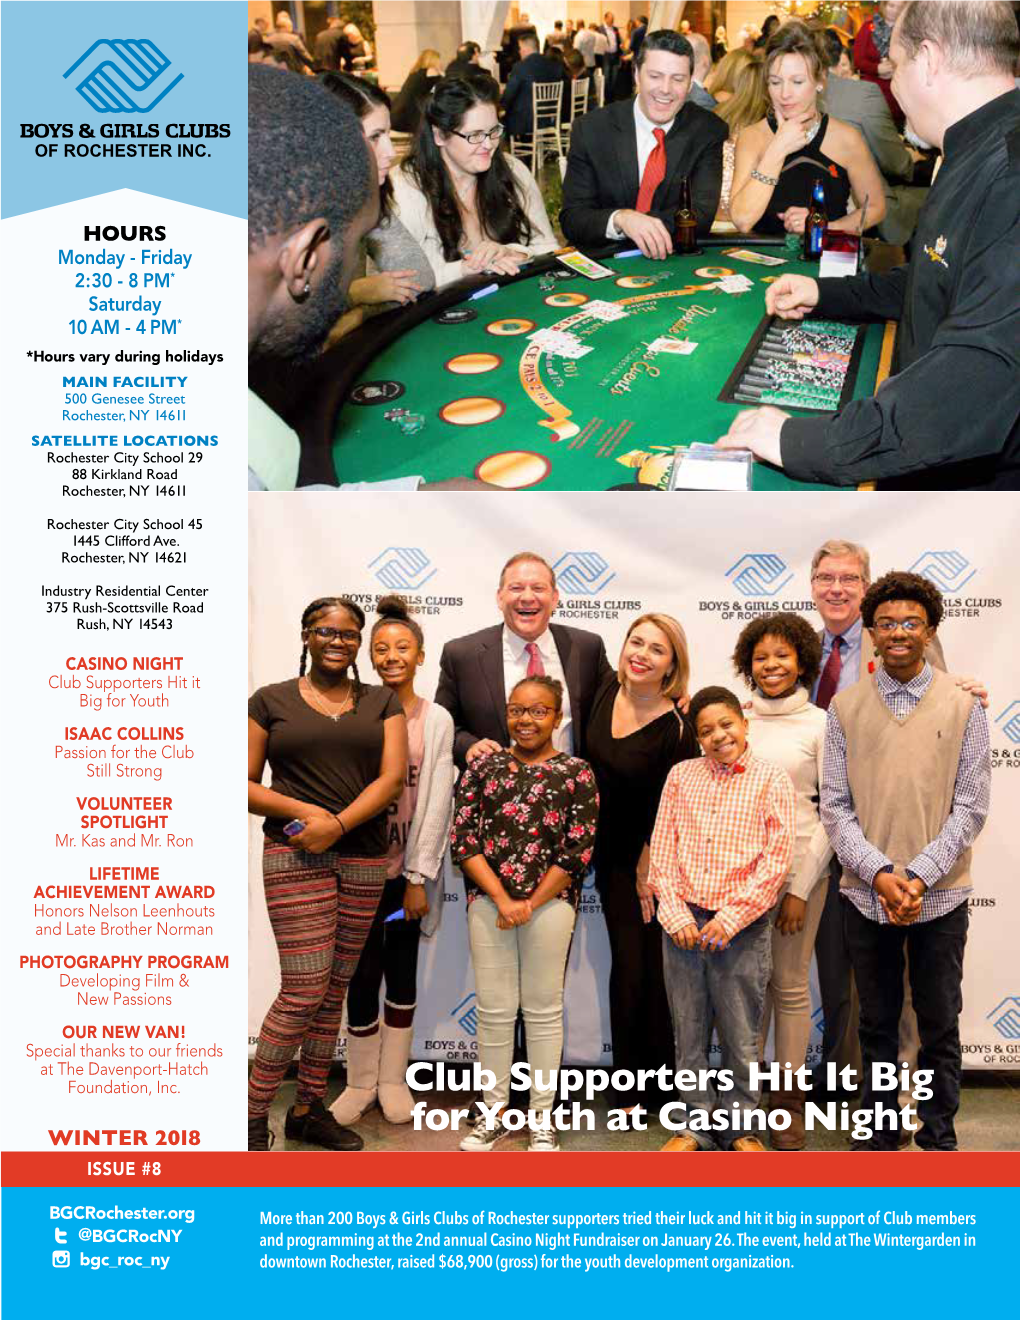 Club Supporters Hit It Big for Youth at Casino Night